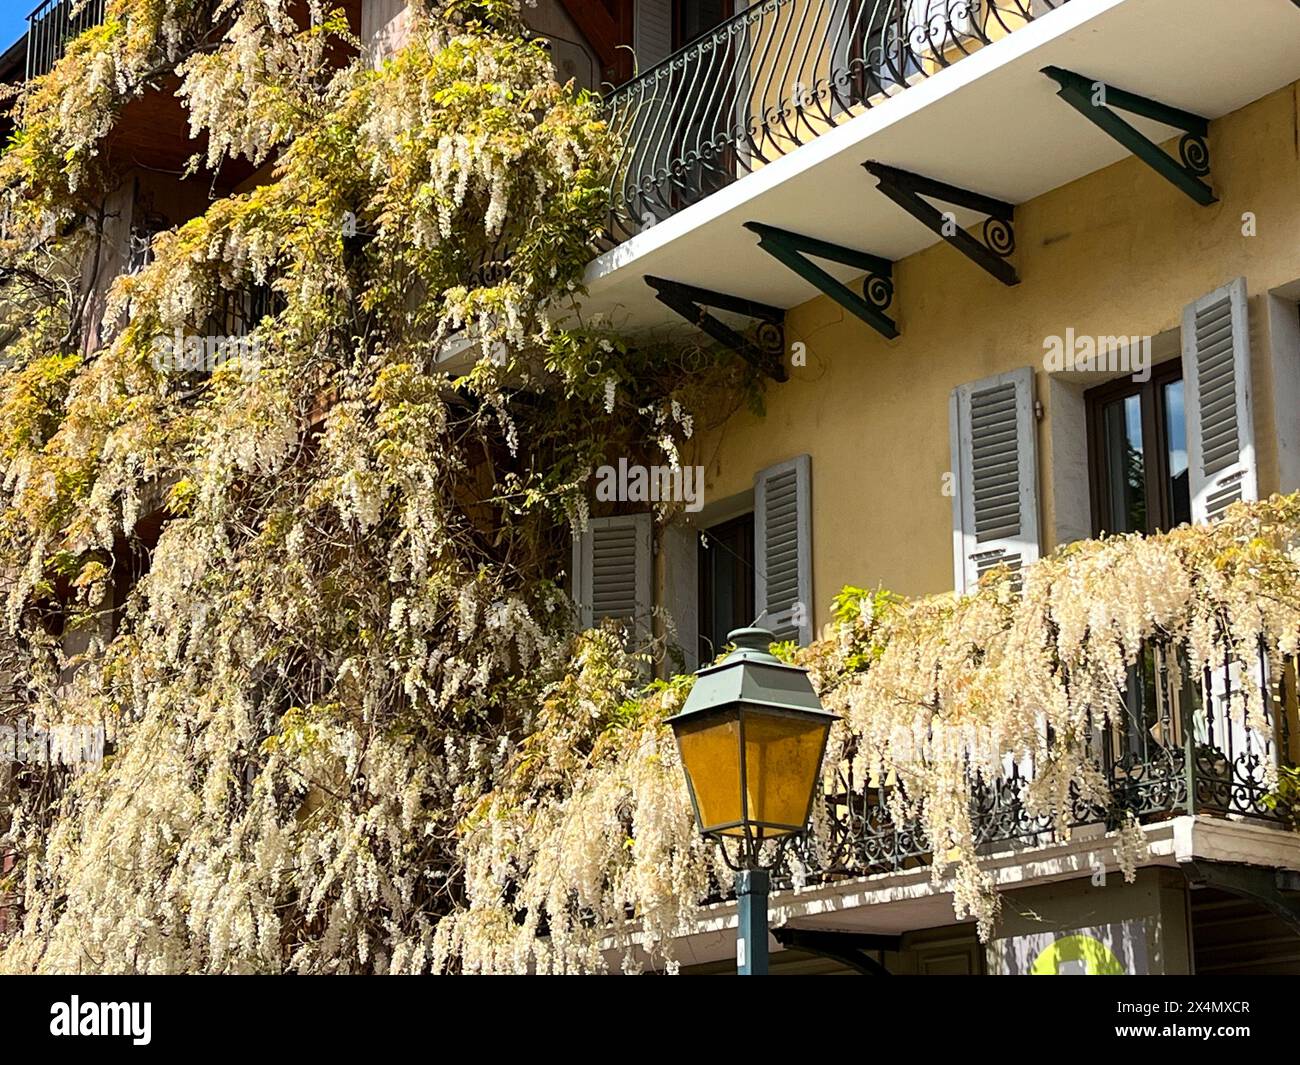 Annecy, Haute-Savoie, France: details of a giant white wisteria climbing on a building in the old town Stock Photo